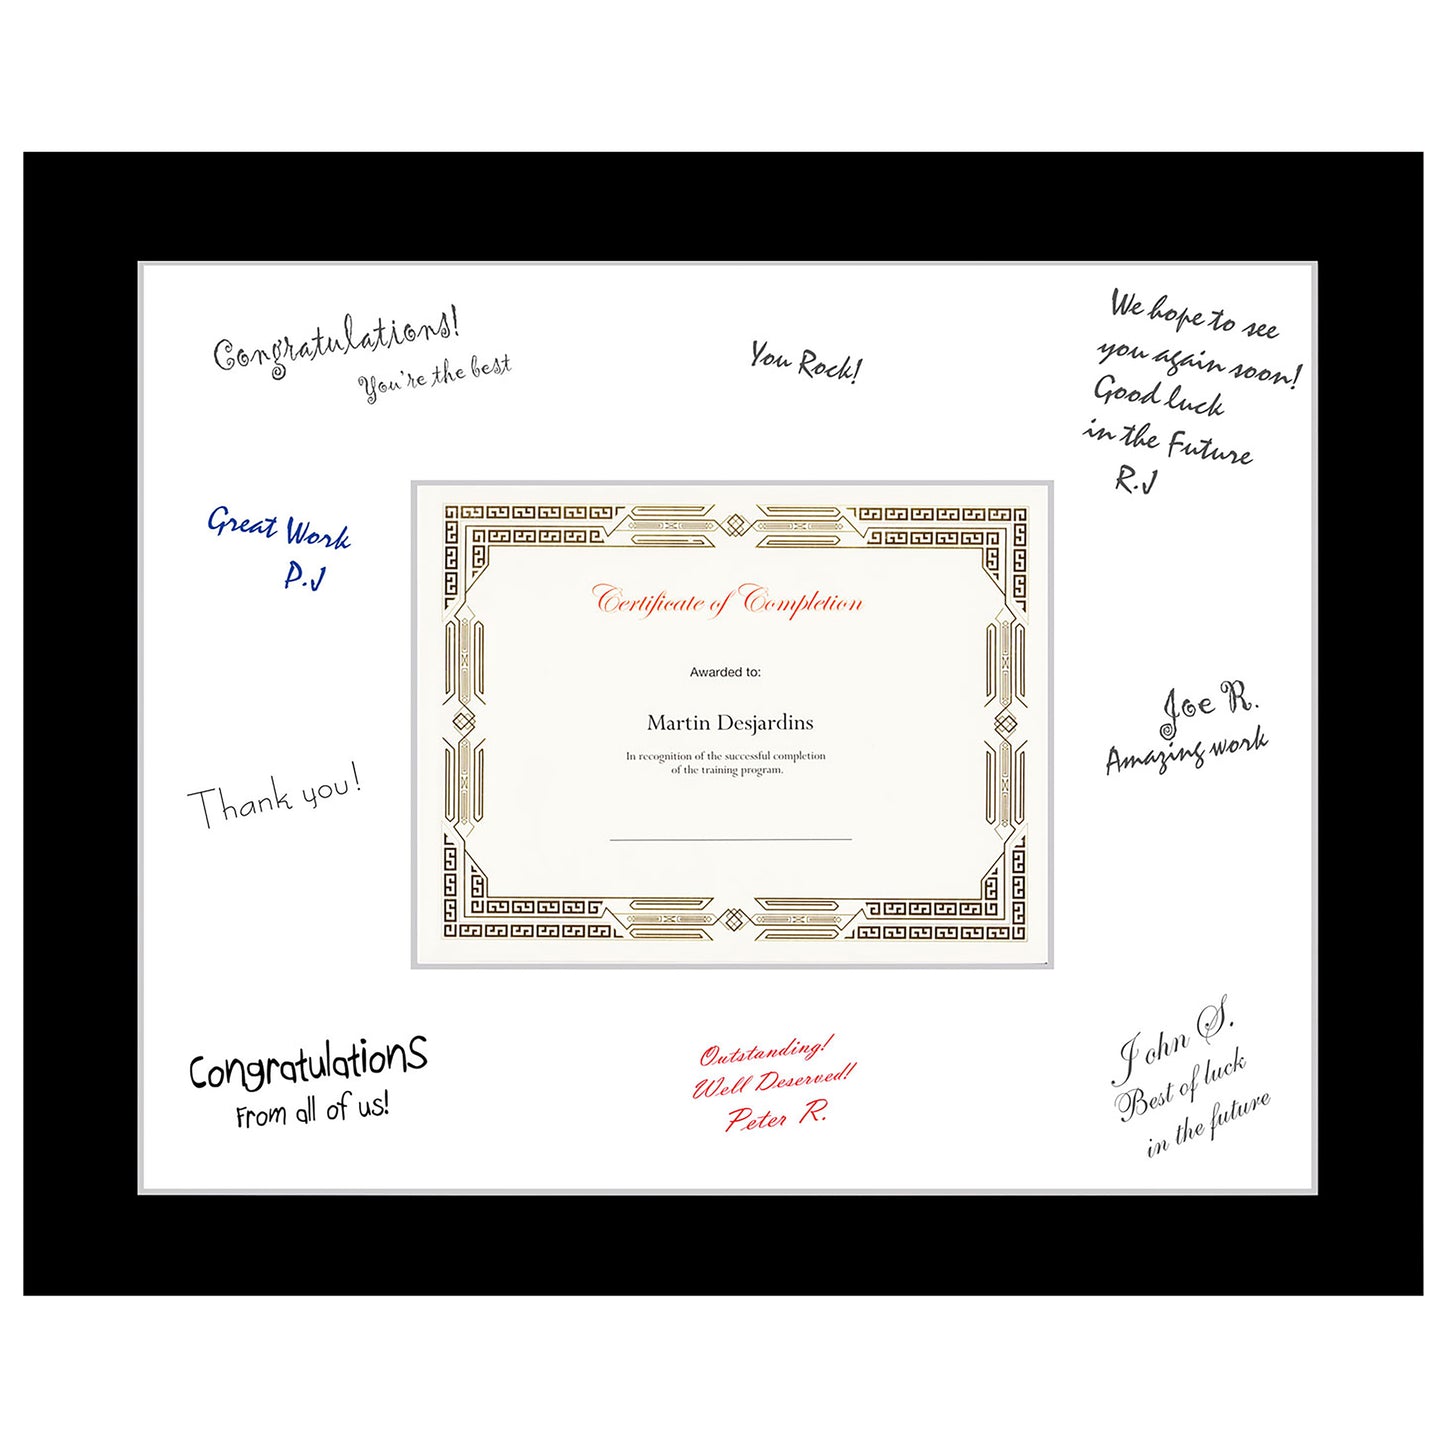 St. James® Oversized Certificate Frame/Diploma Frame/Document Frame,18.5" x 22.5" (47 x 57 cm), Black with White Double Mat